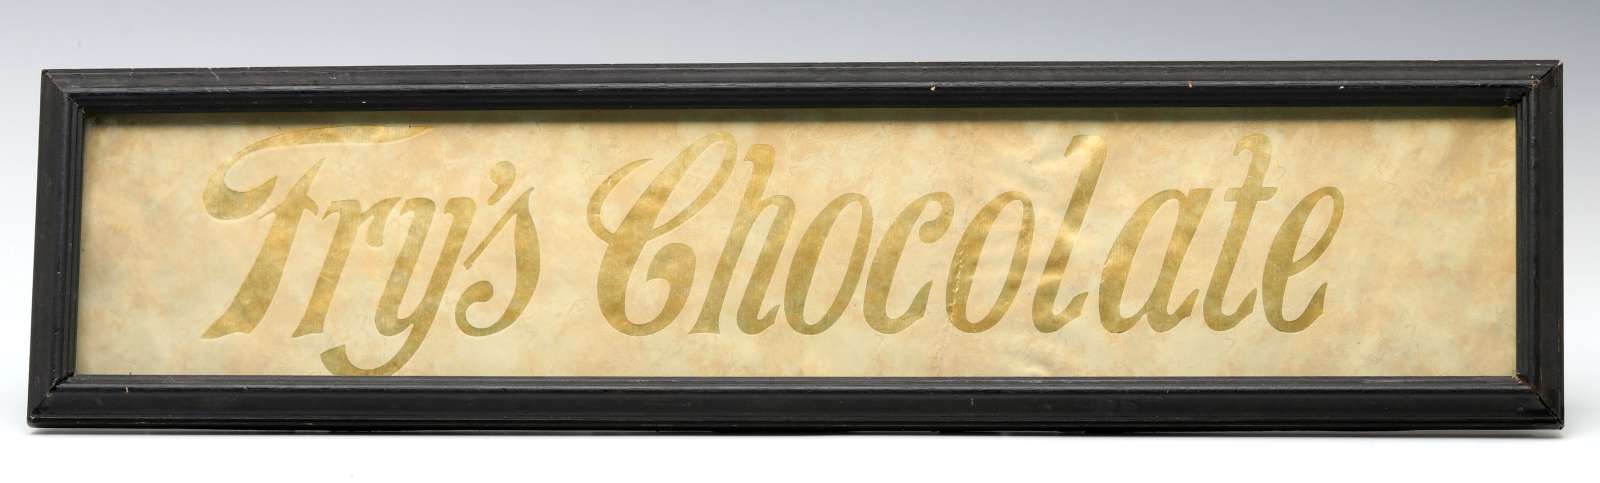 FRY'S CHOCOLATE REVERSE ETCHED GLASS ADVERTISING